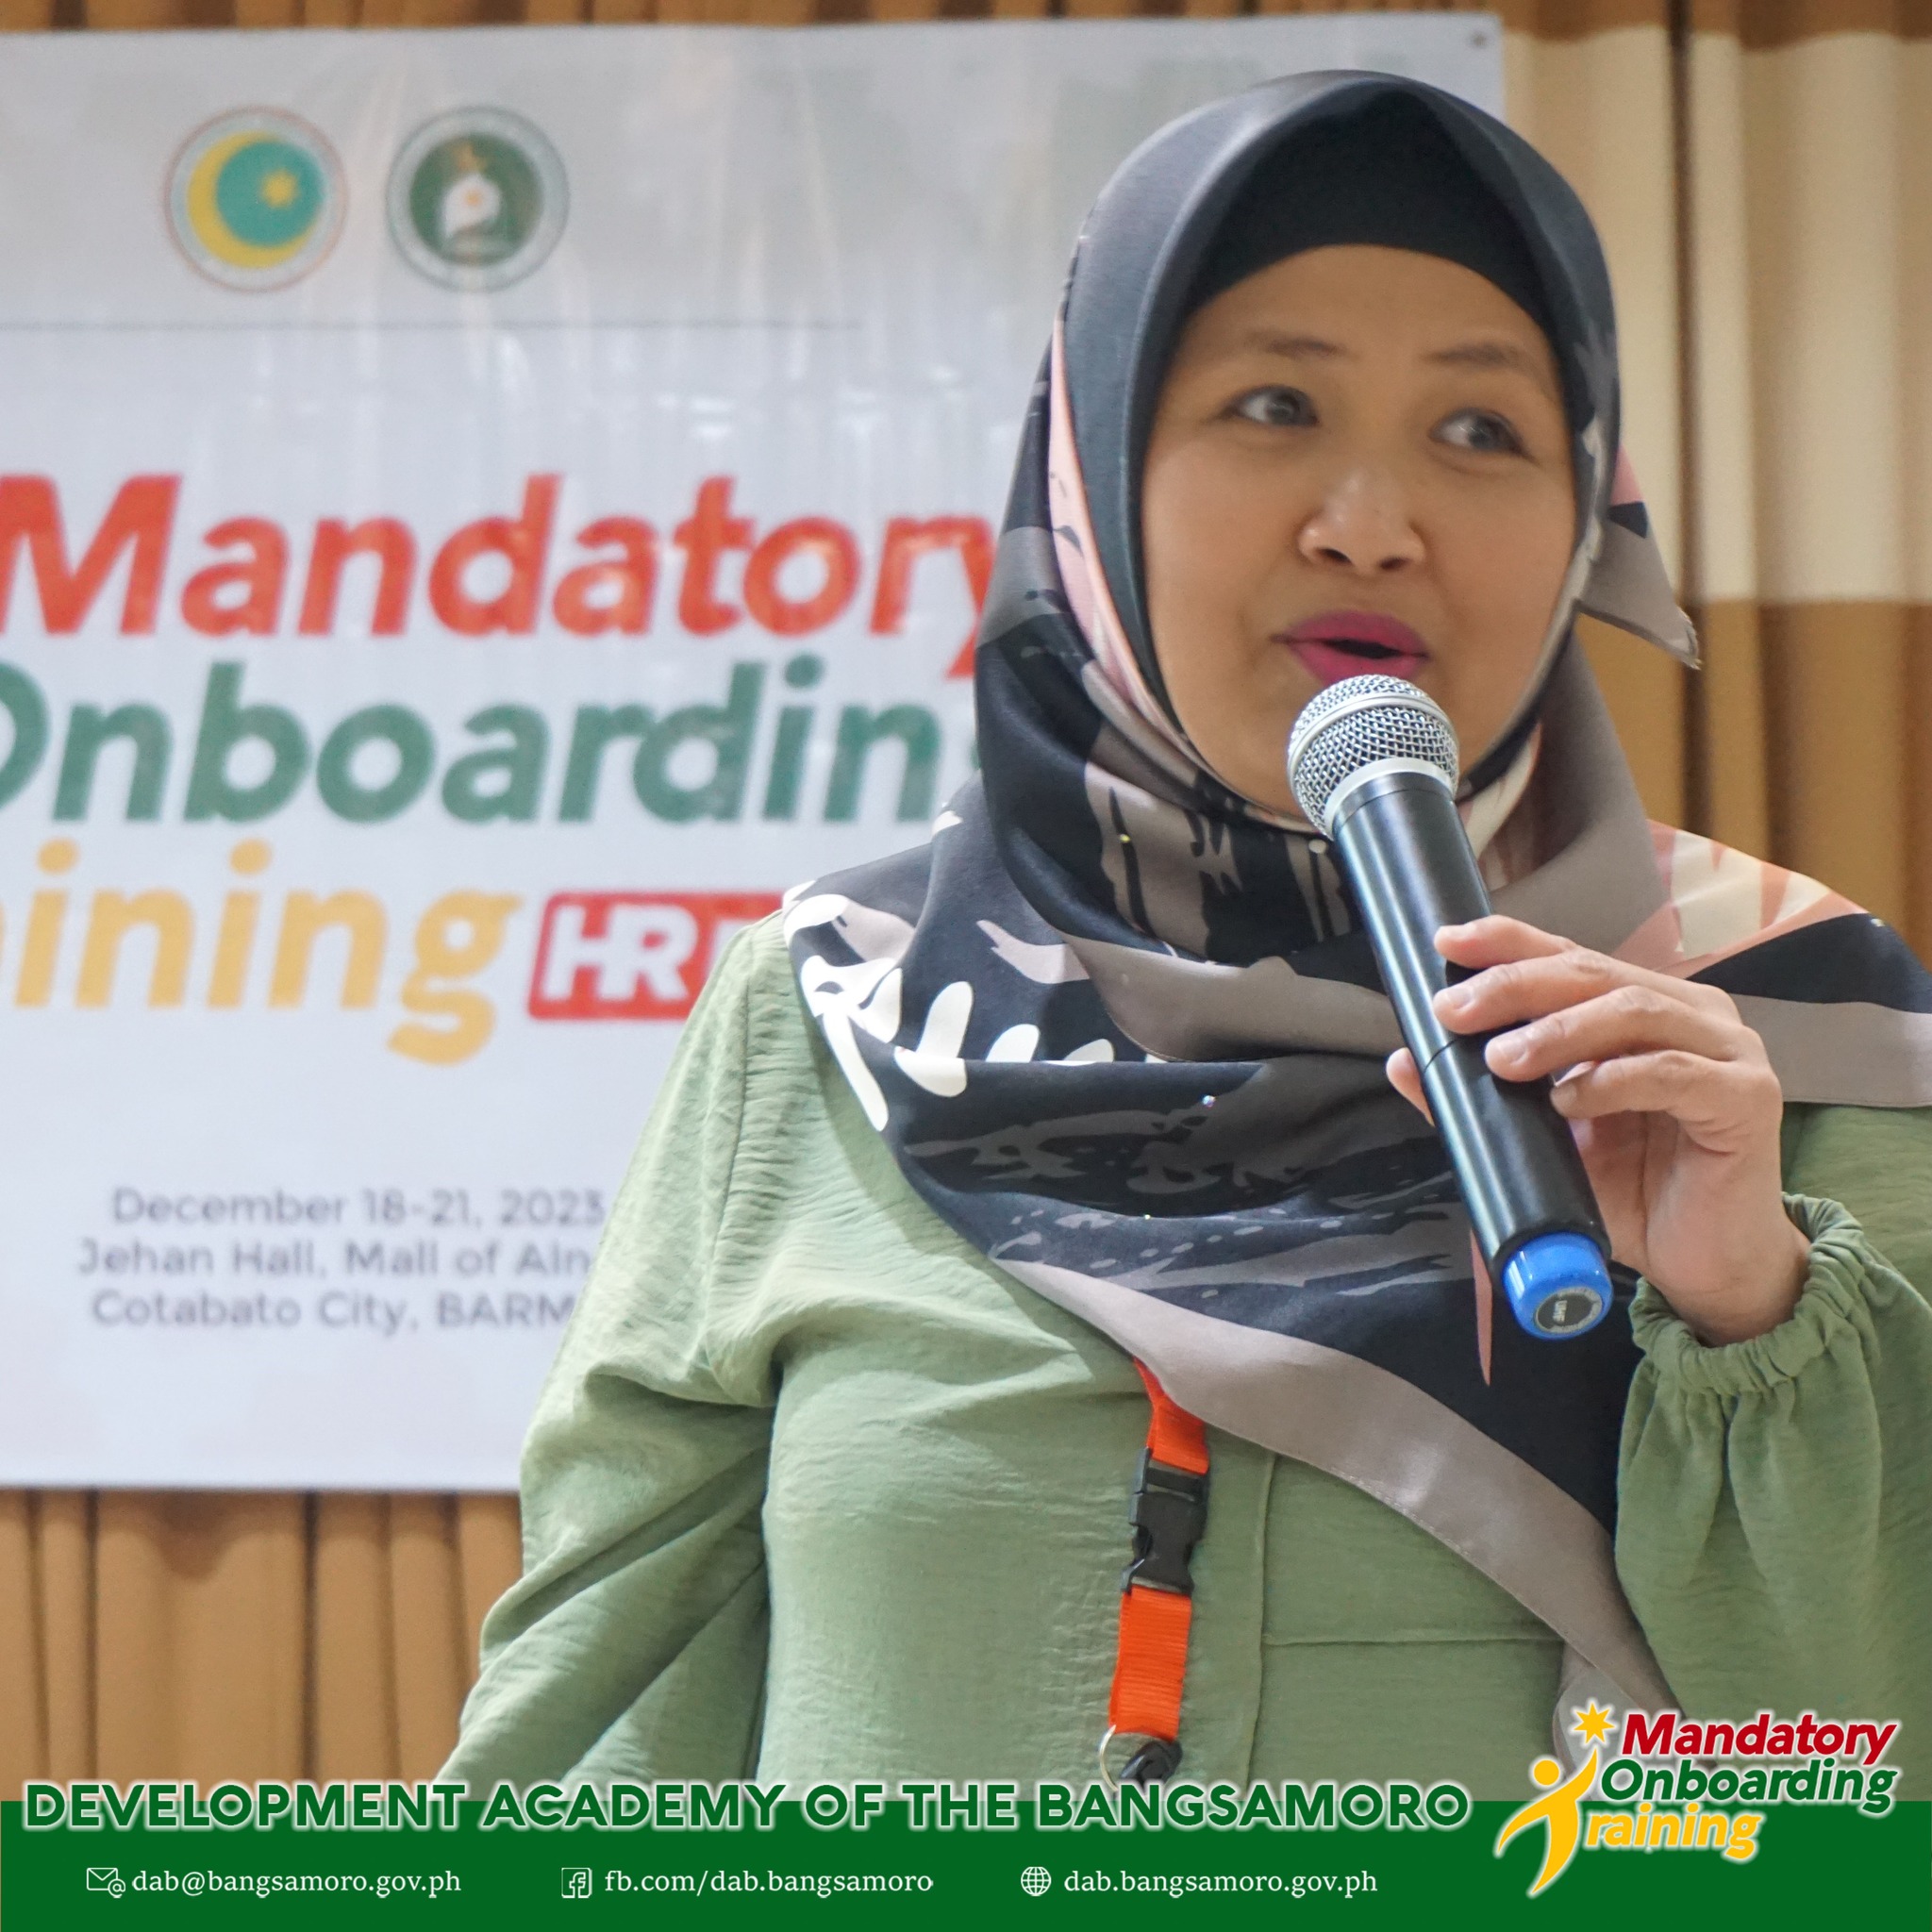 You are currently viewing LOOK: Development Academy of the Bangsamoro Jump-starts the Simultaneous Mandatory Onboarding Training HR Edition and Batch 4